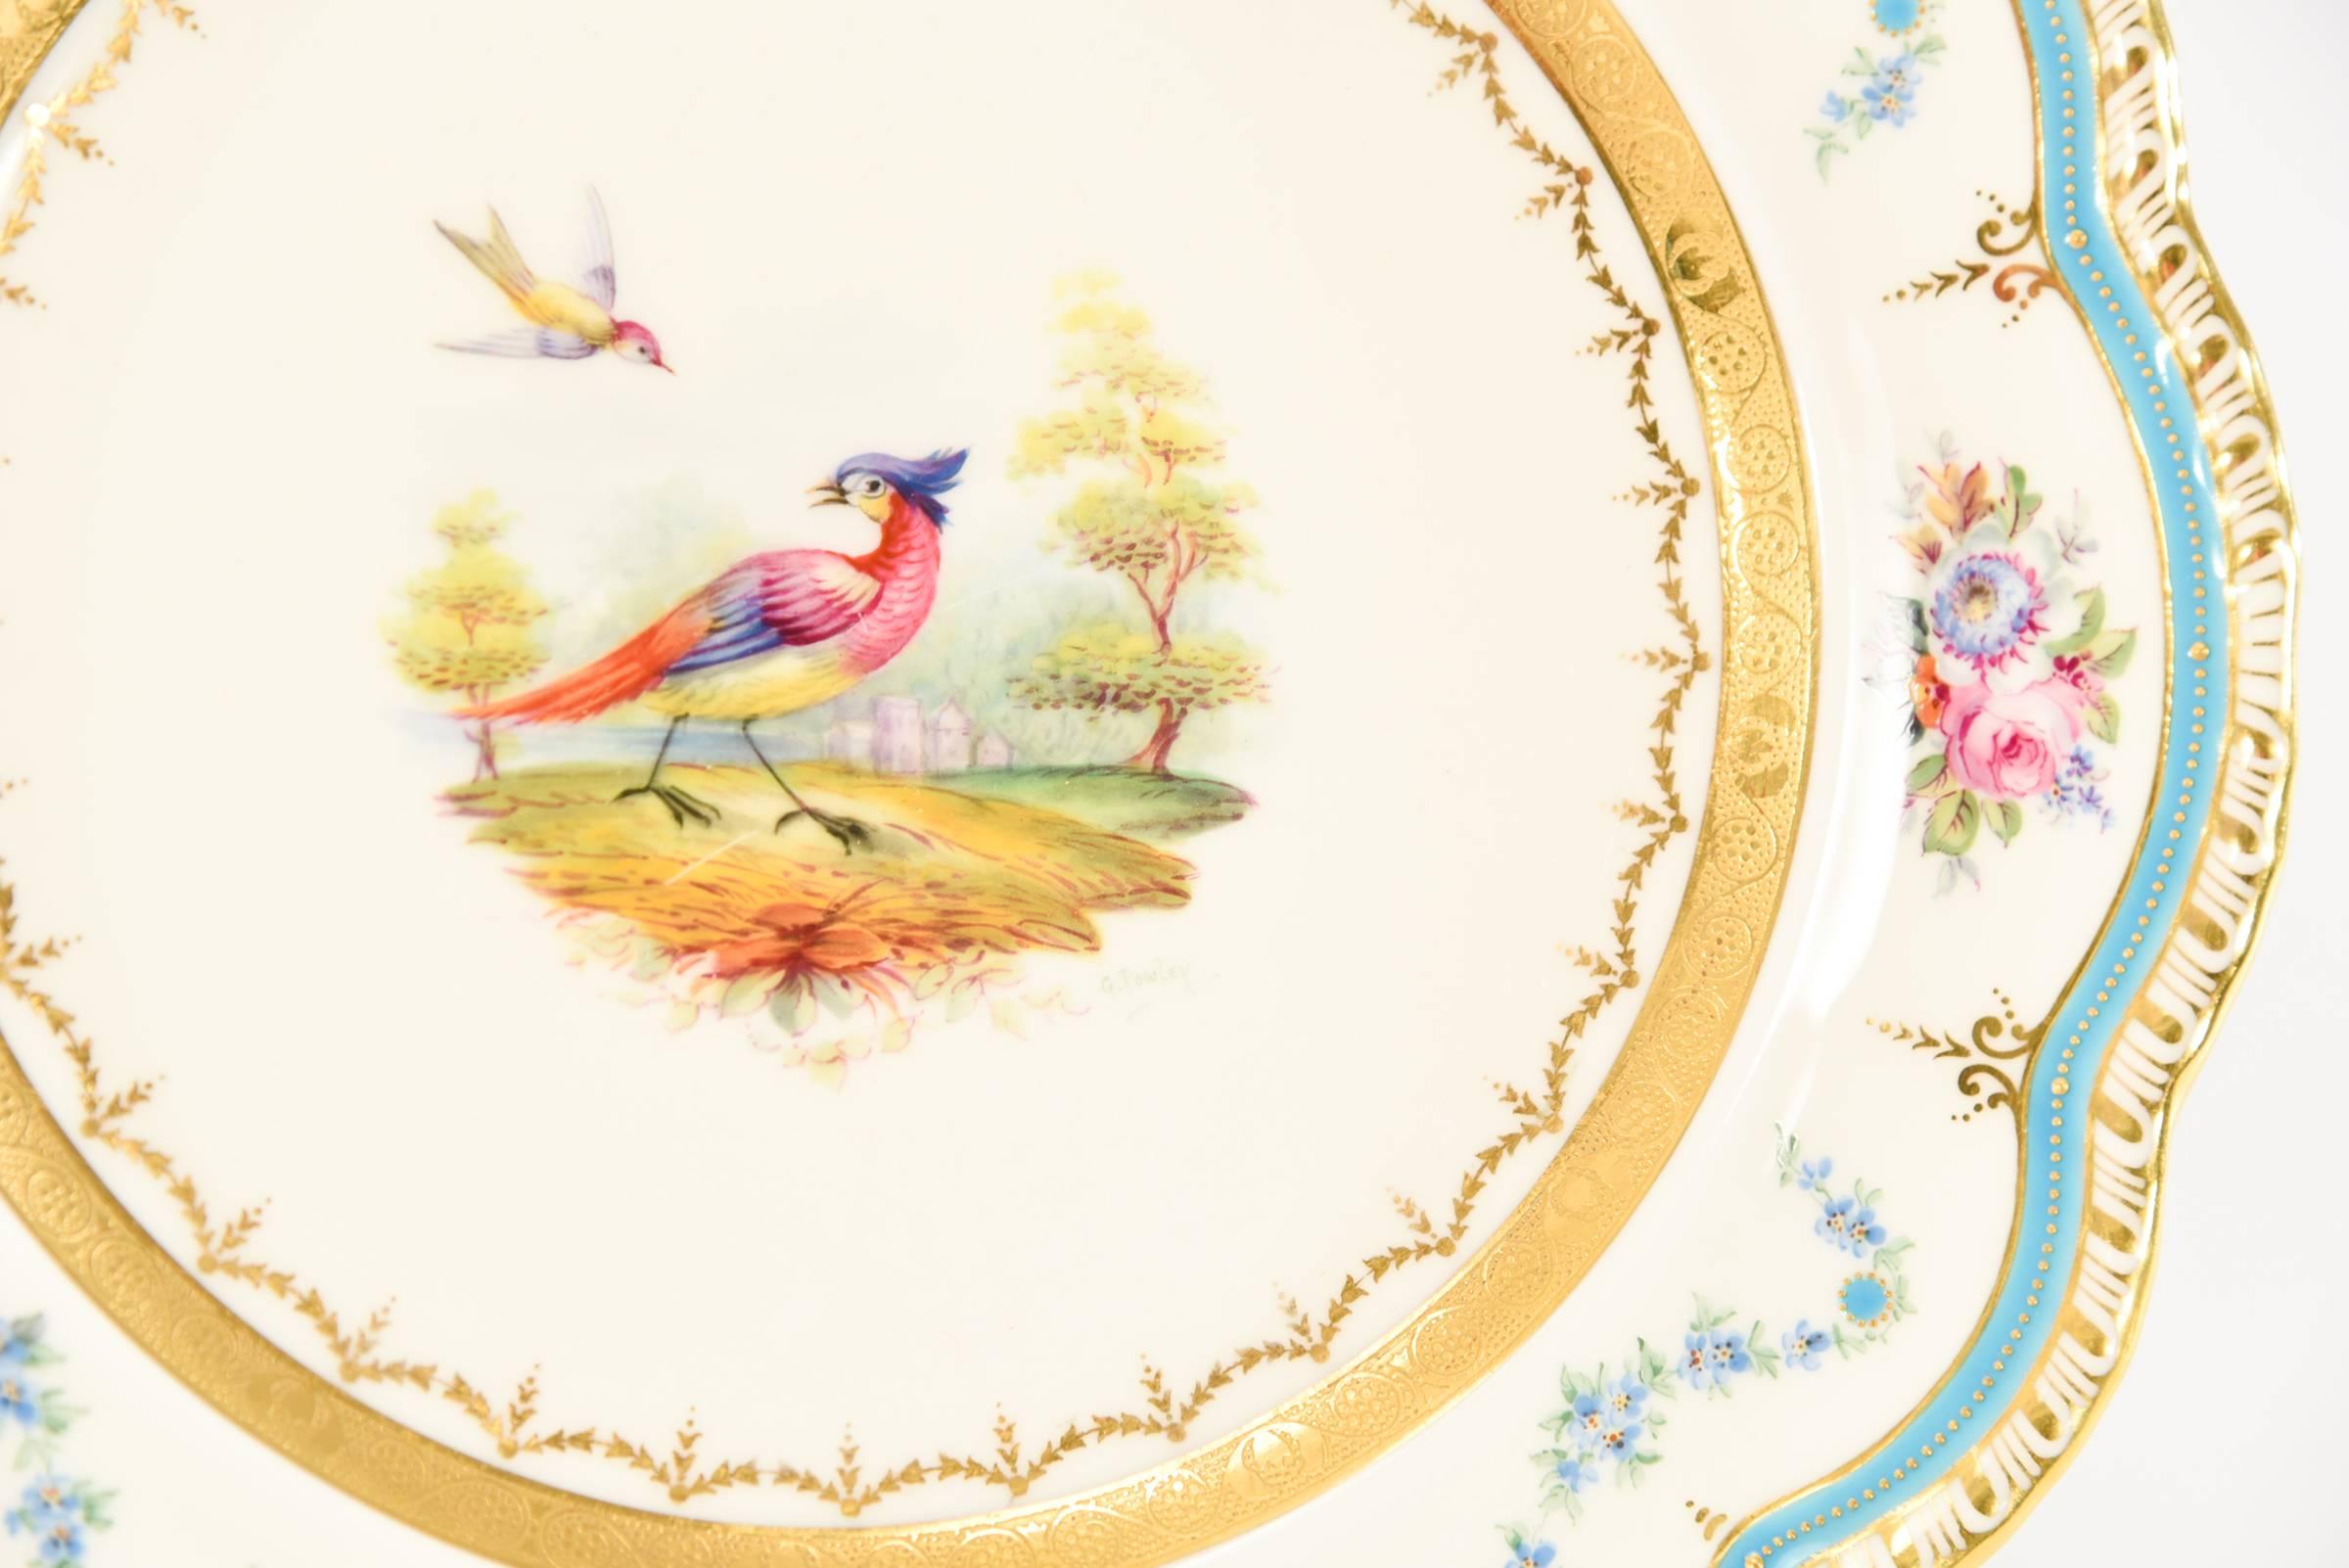 English 12 Cauldon Hand Painted Signed G Rowley Ornate Exotic Bird & Floral Desserts For Sale